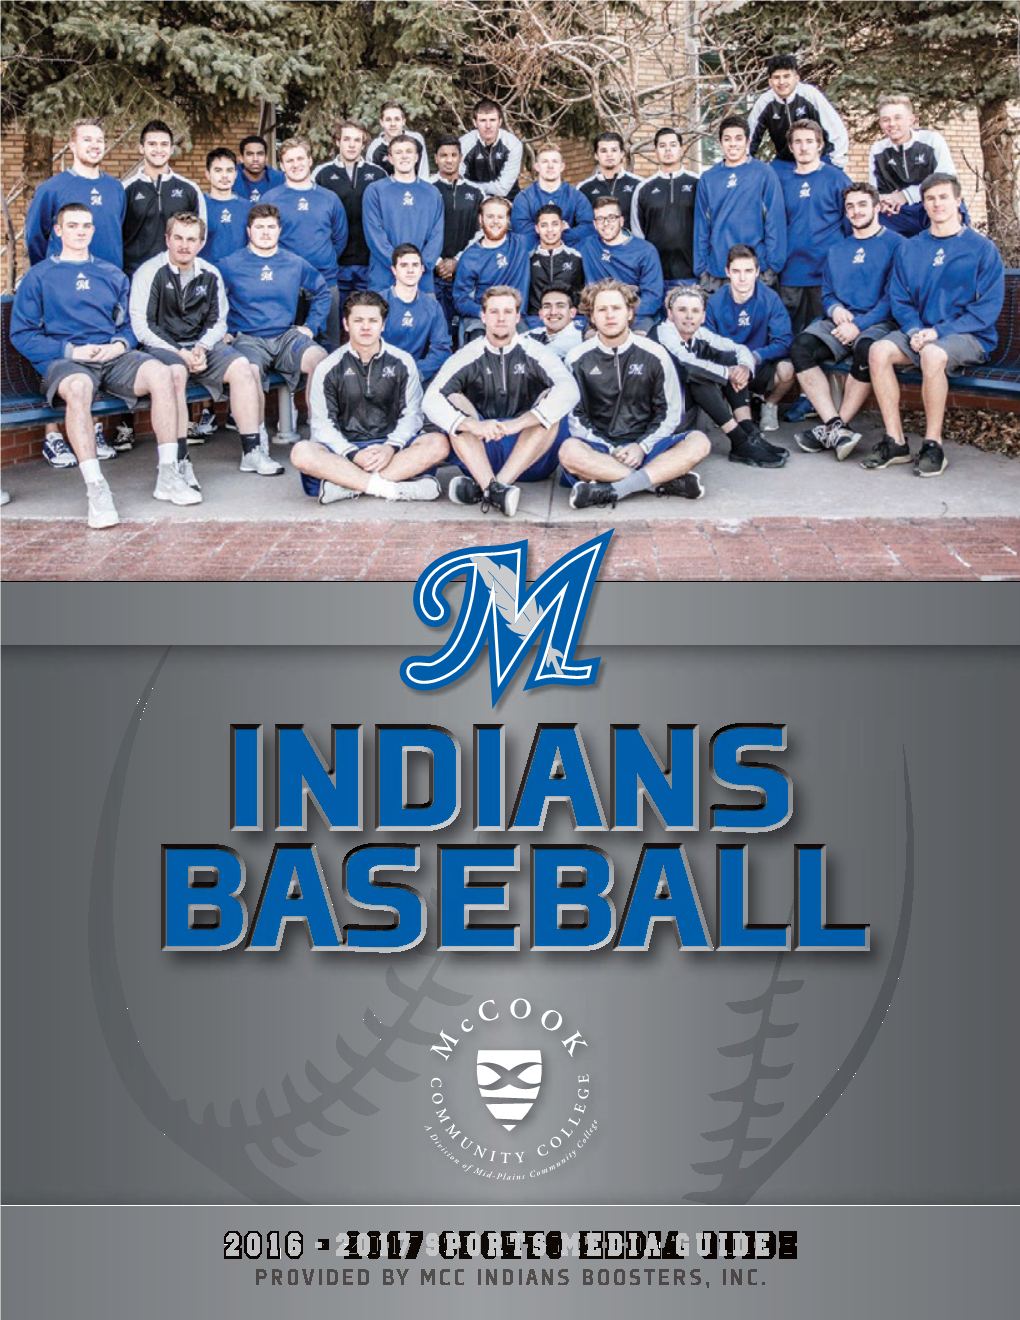 2017 Sports Media Guide Provided by Mcc Indians Boosters, Inc